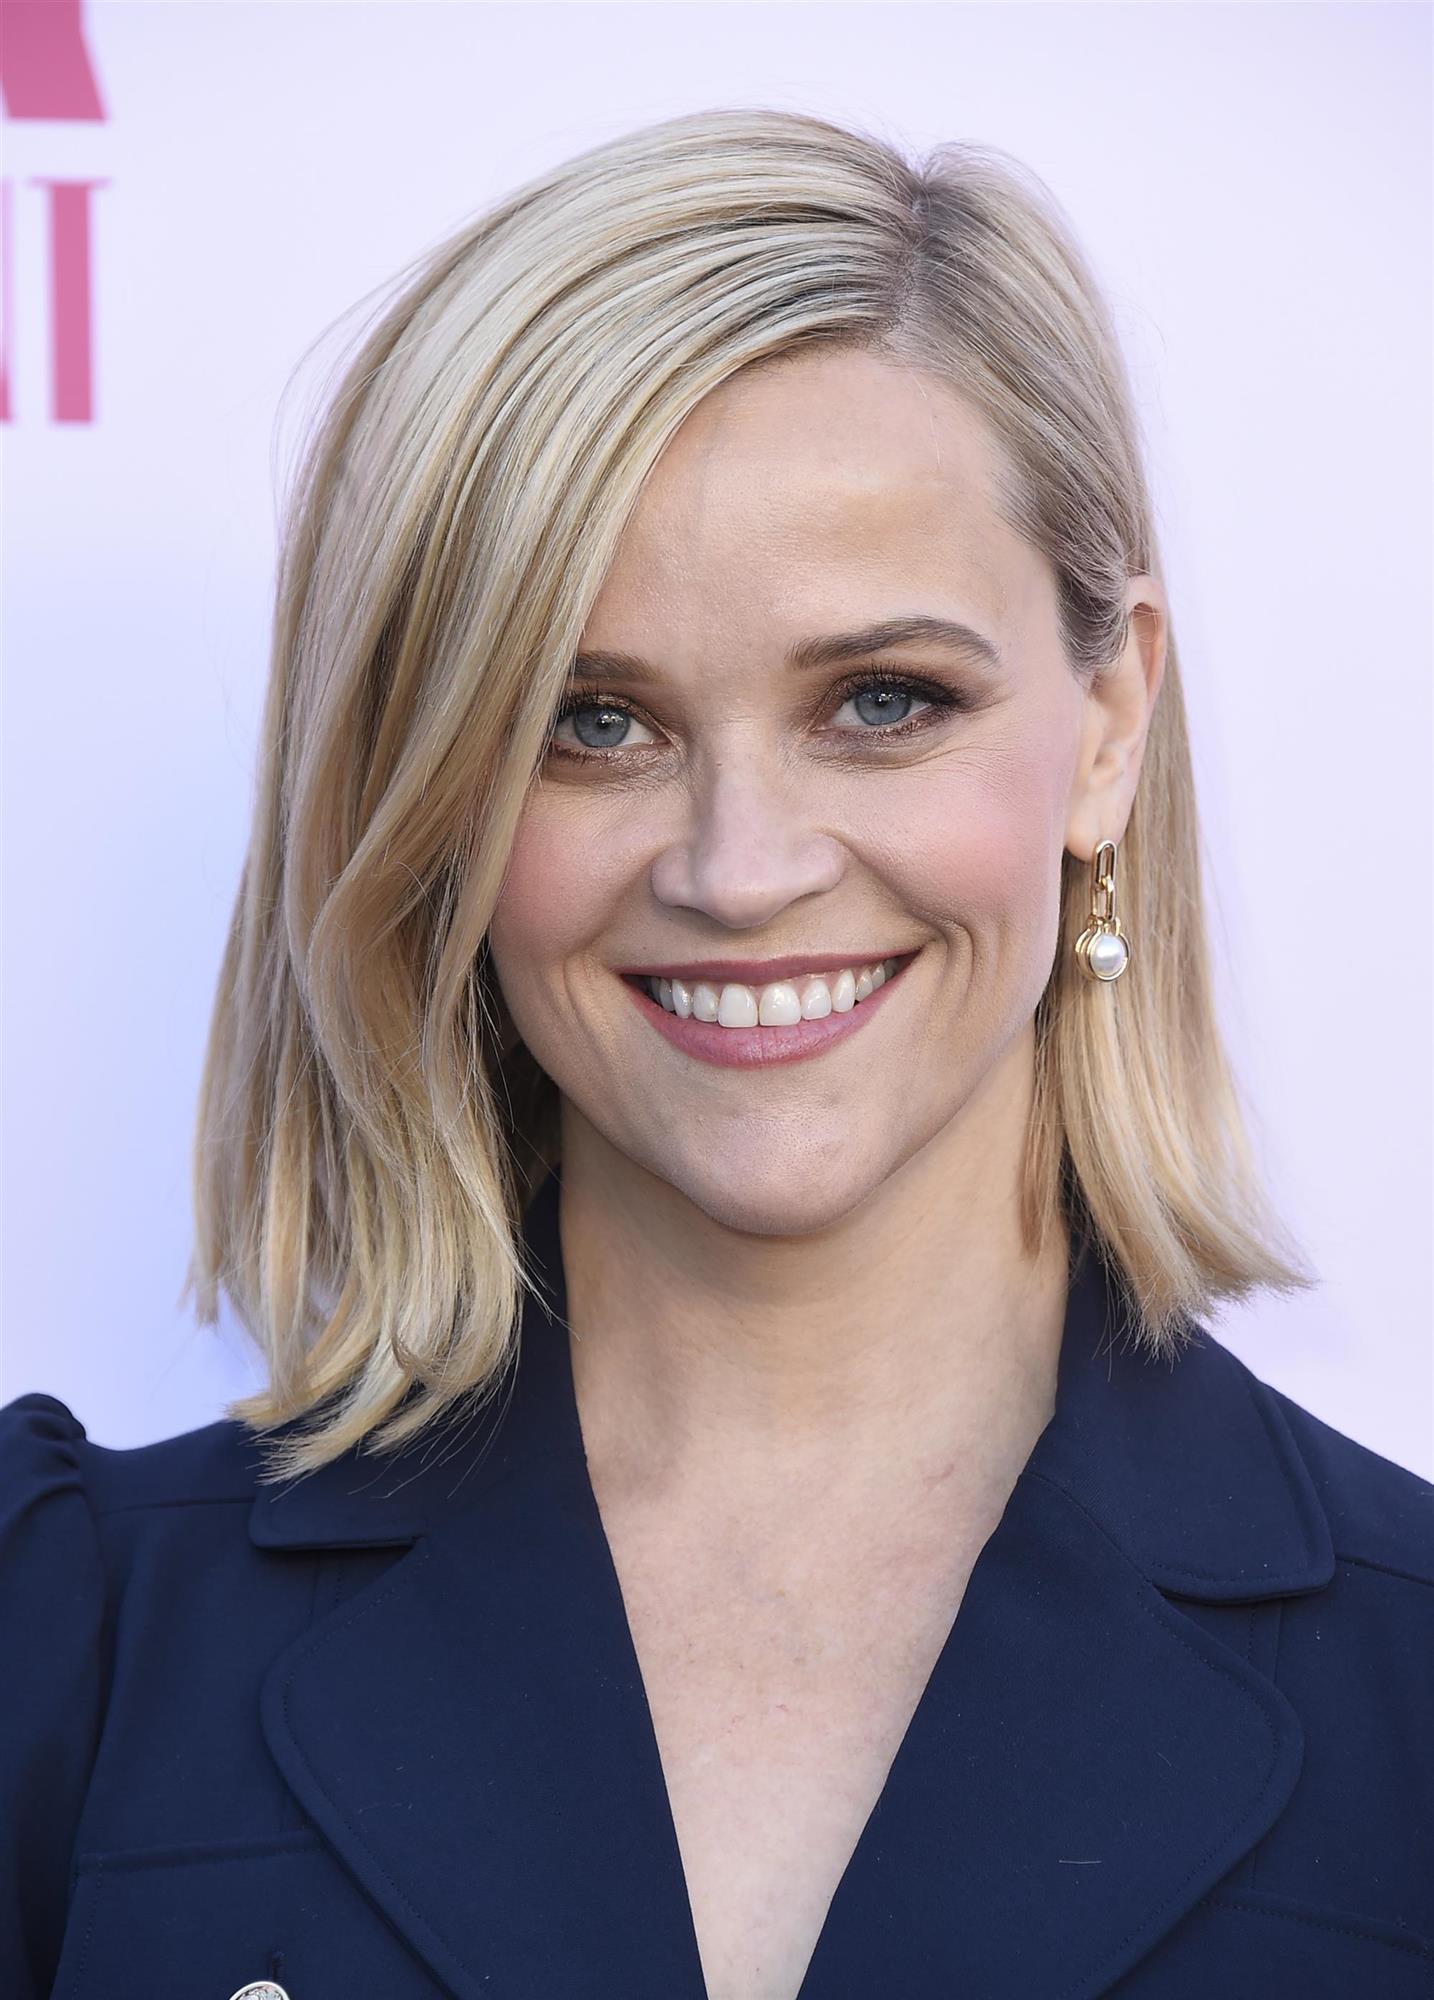 Reese Witherspoon con media melena